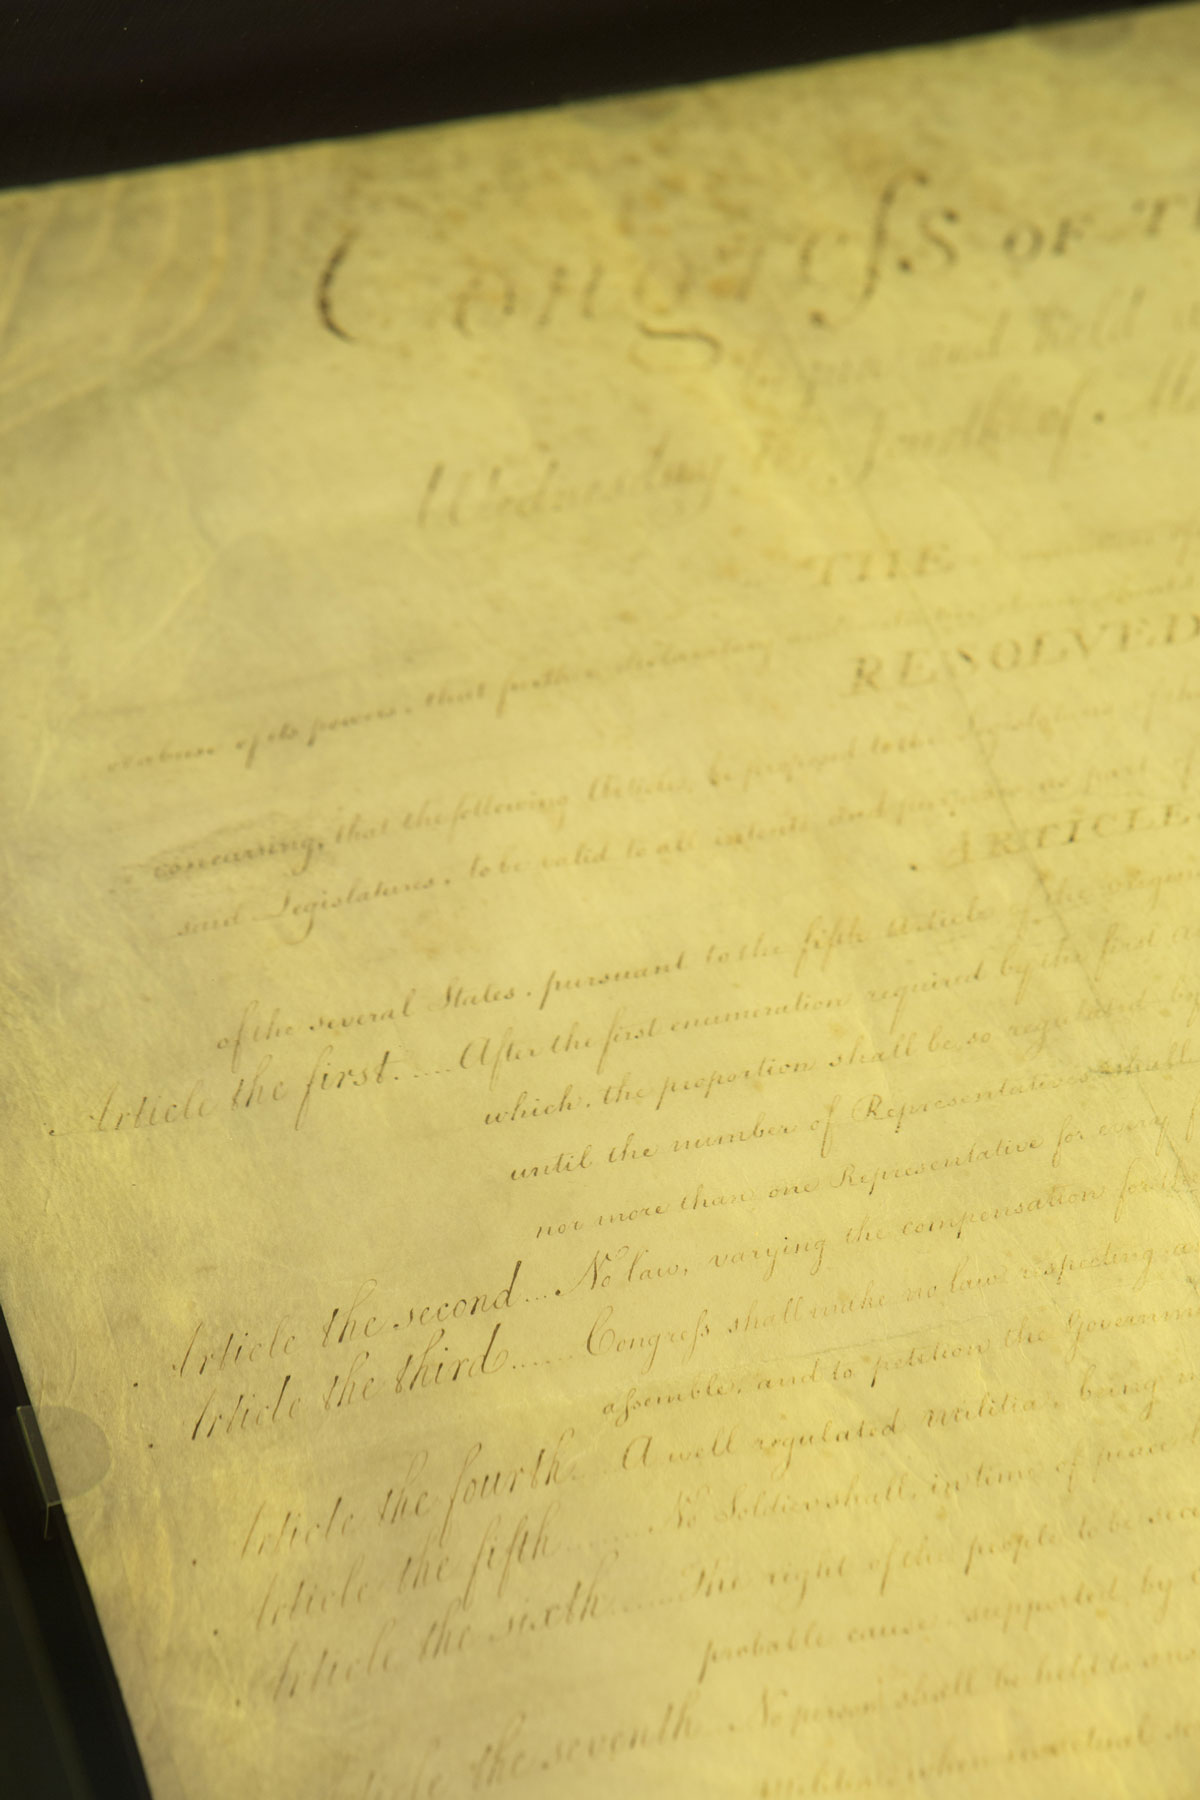 4 DOCS OF FREEDOM CONSTITUTION DECLARATION BILL OF RIGHTS GBG ADDRESS PARCHMENT 